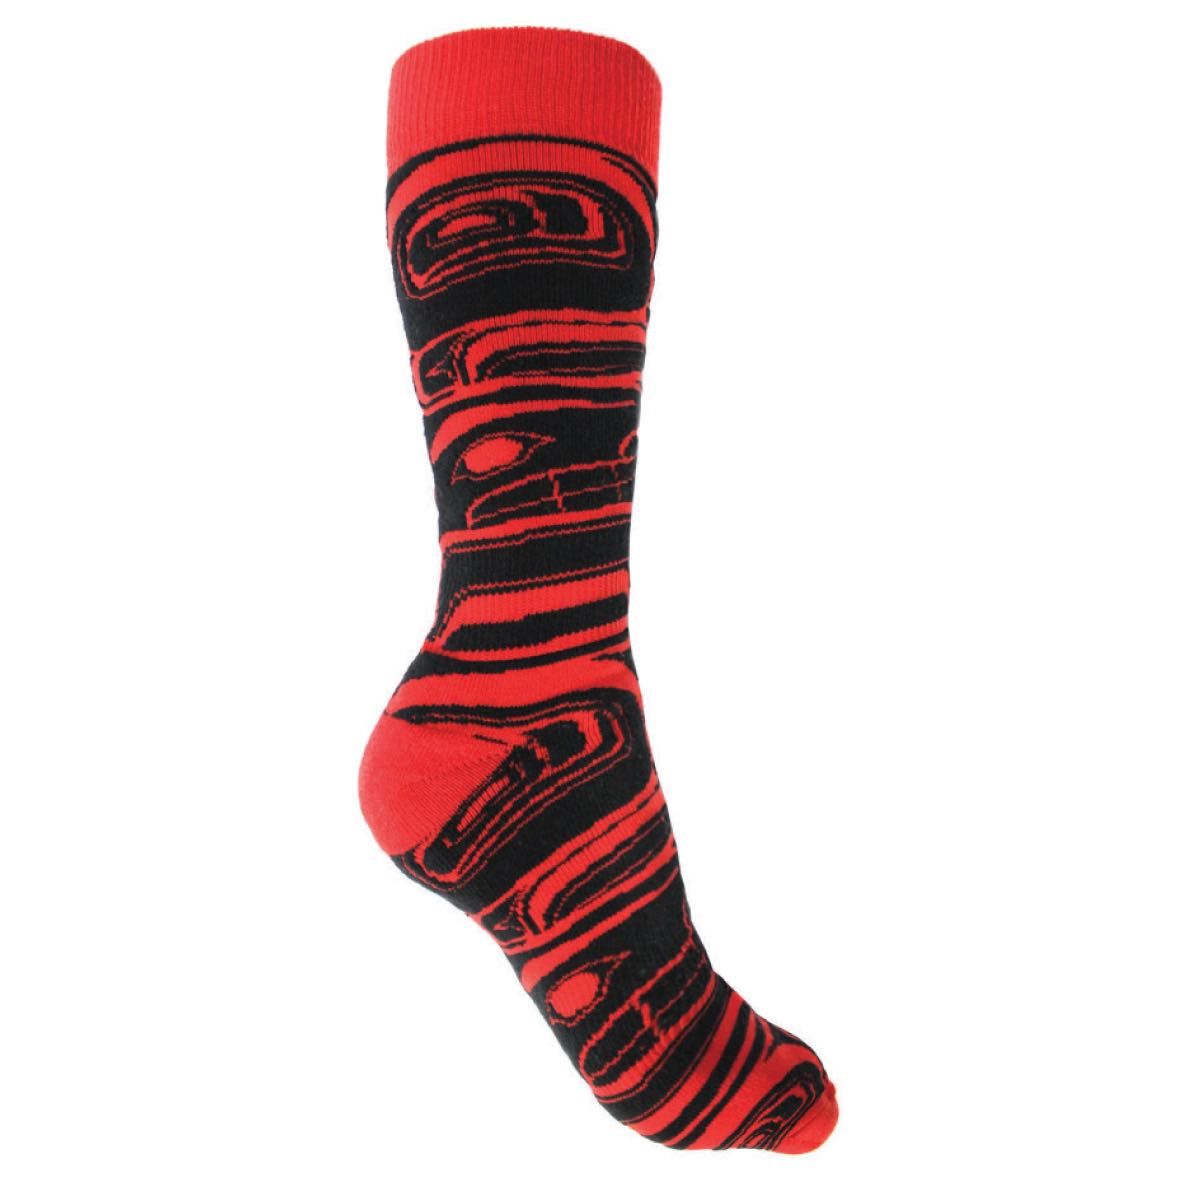 *Art Socks In Transition S/M - *Art Socks In Transition S/M -  - House of Himwitsa Native Art Gallery and Gifts